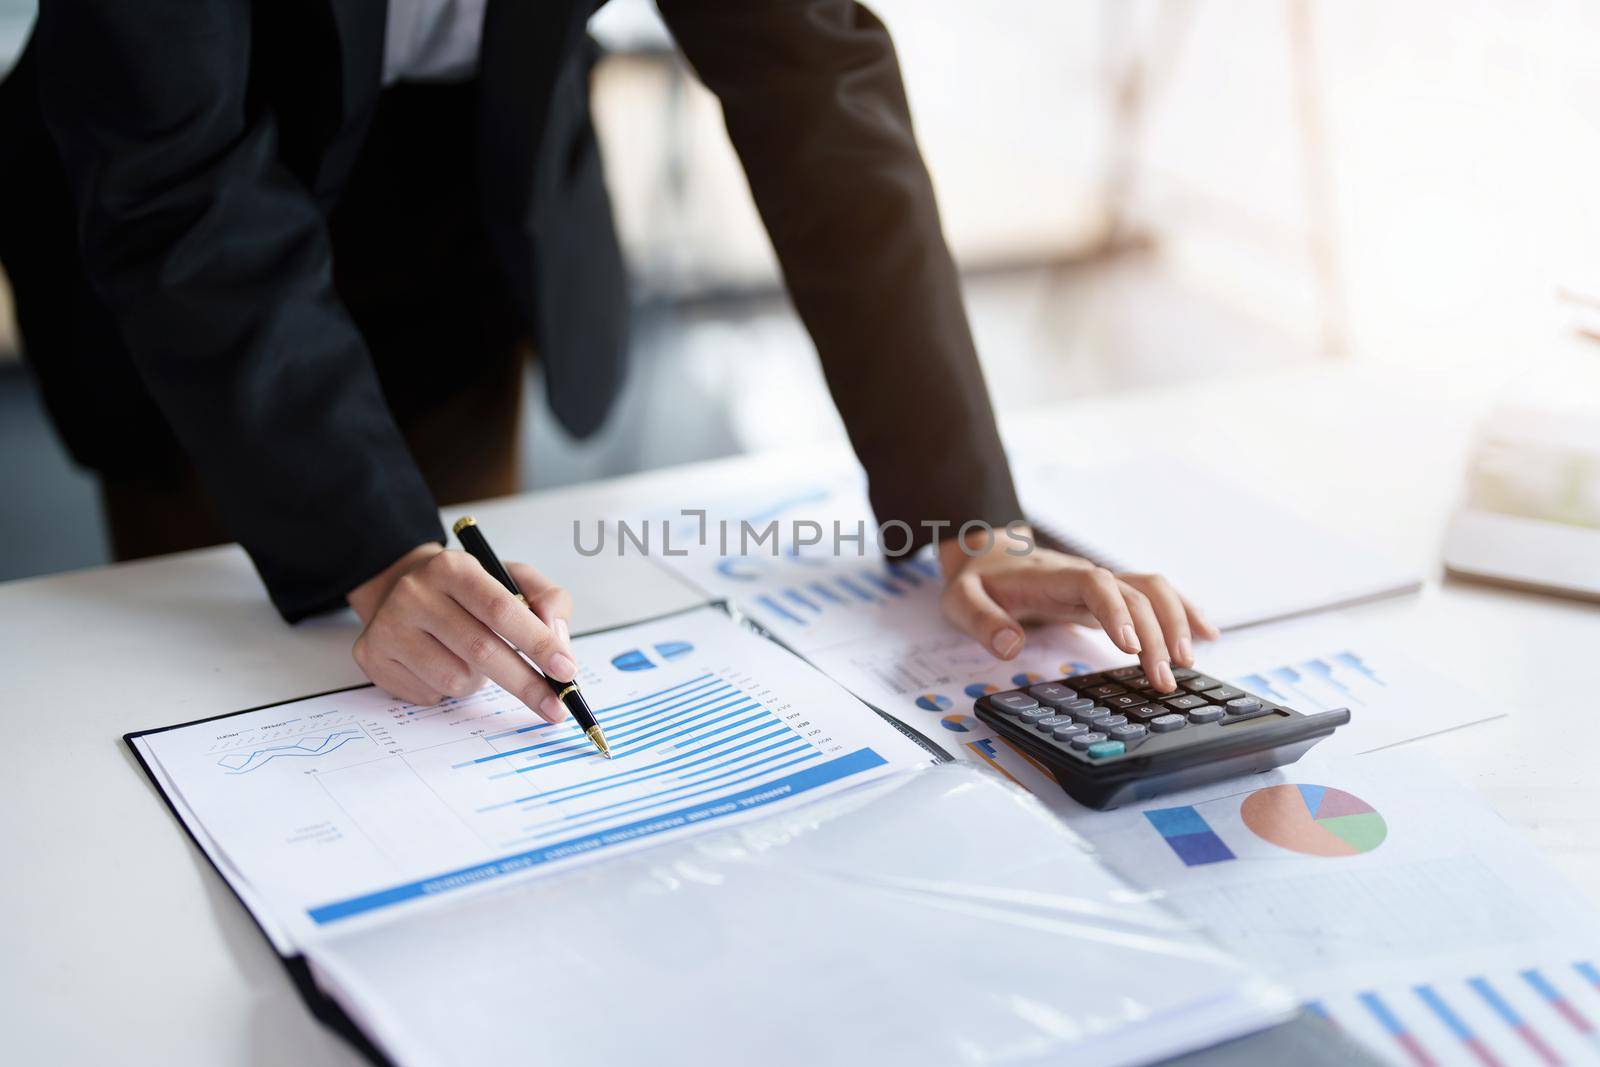 data analysis, plan, marketing, accounting, audit, asian business woman holding pen of planning marketing using statistical data sheet and calculator to present marketing plan project at meeting